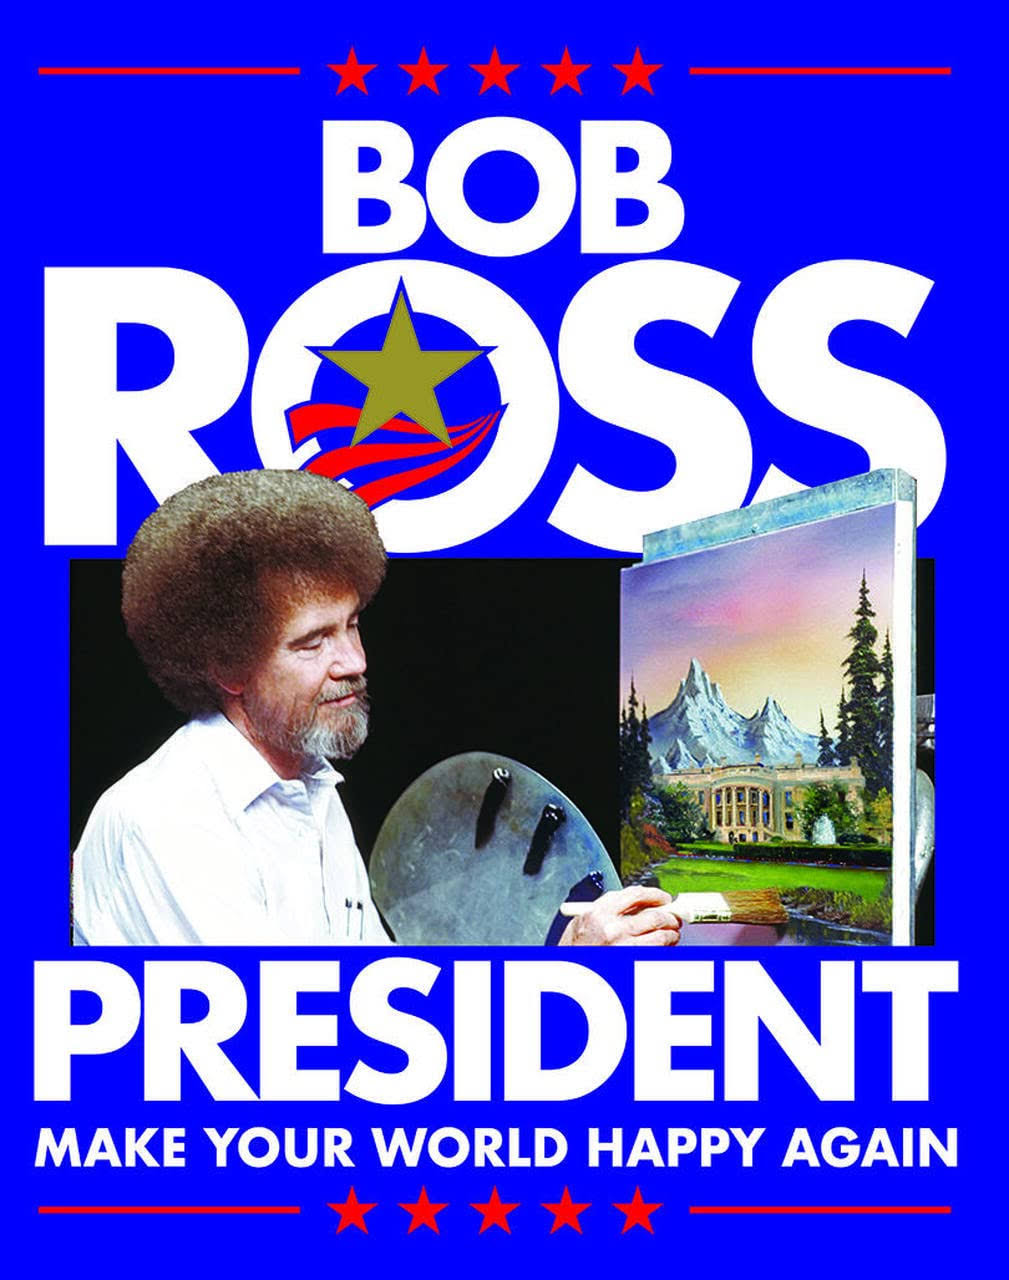 New Bob Ross President Decorative Metal Tin Sign Made in The USA